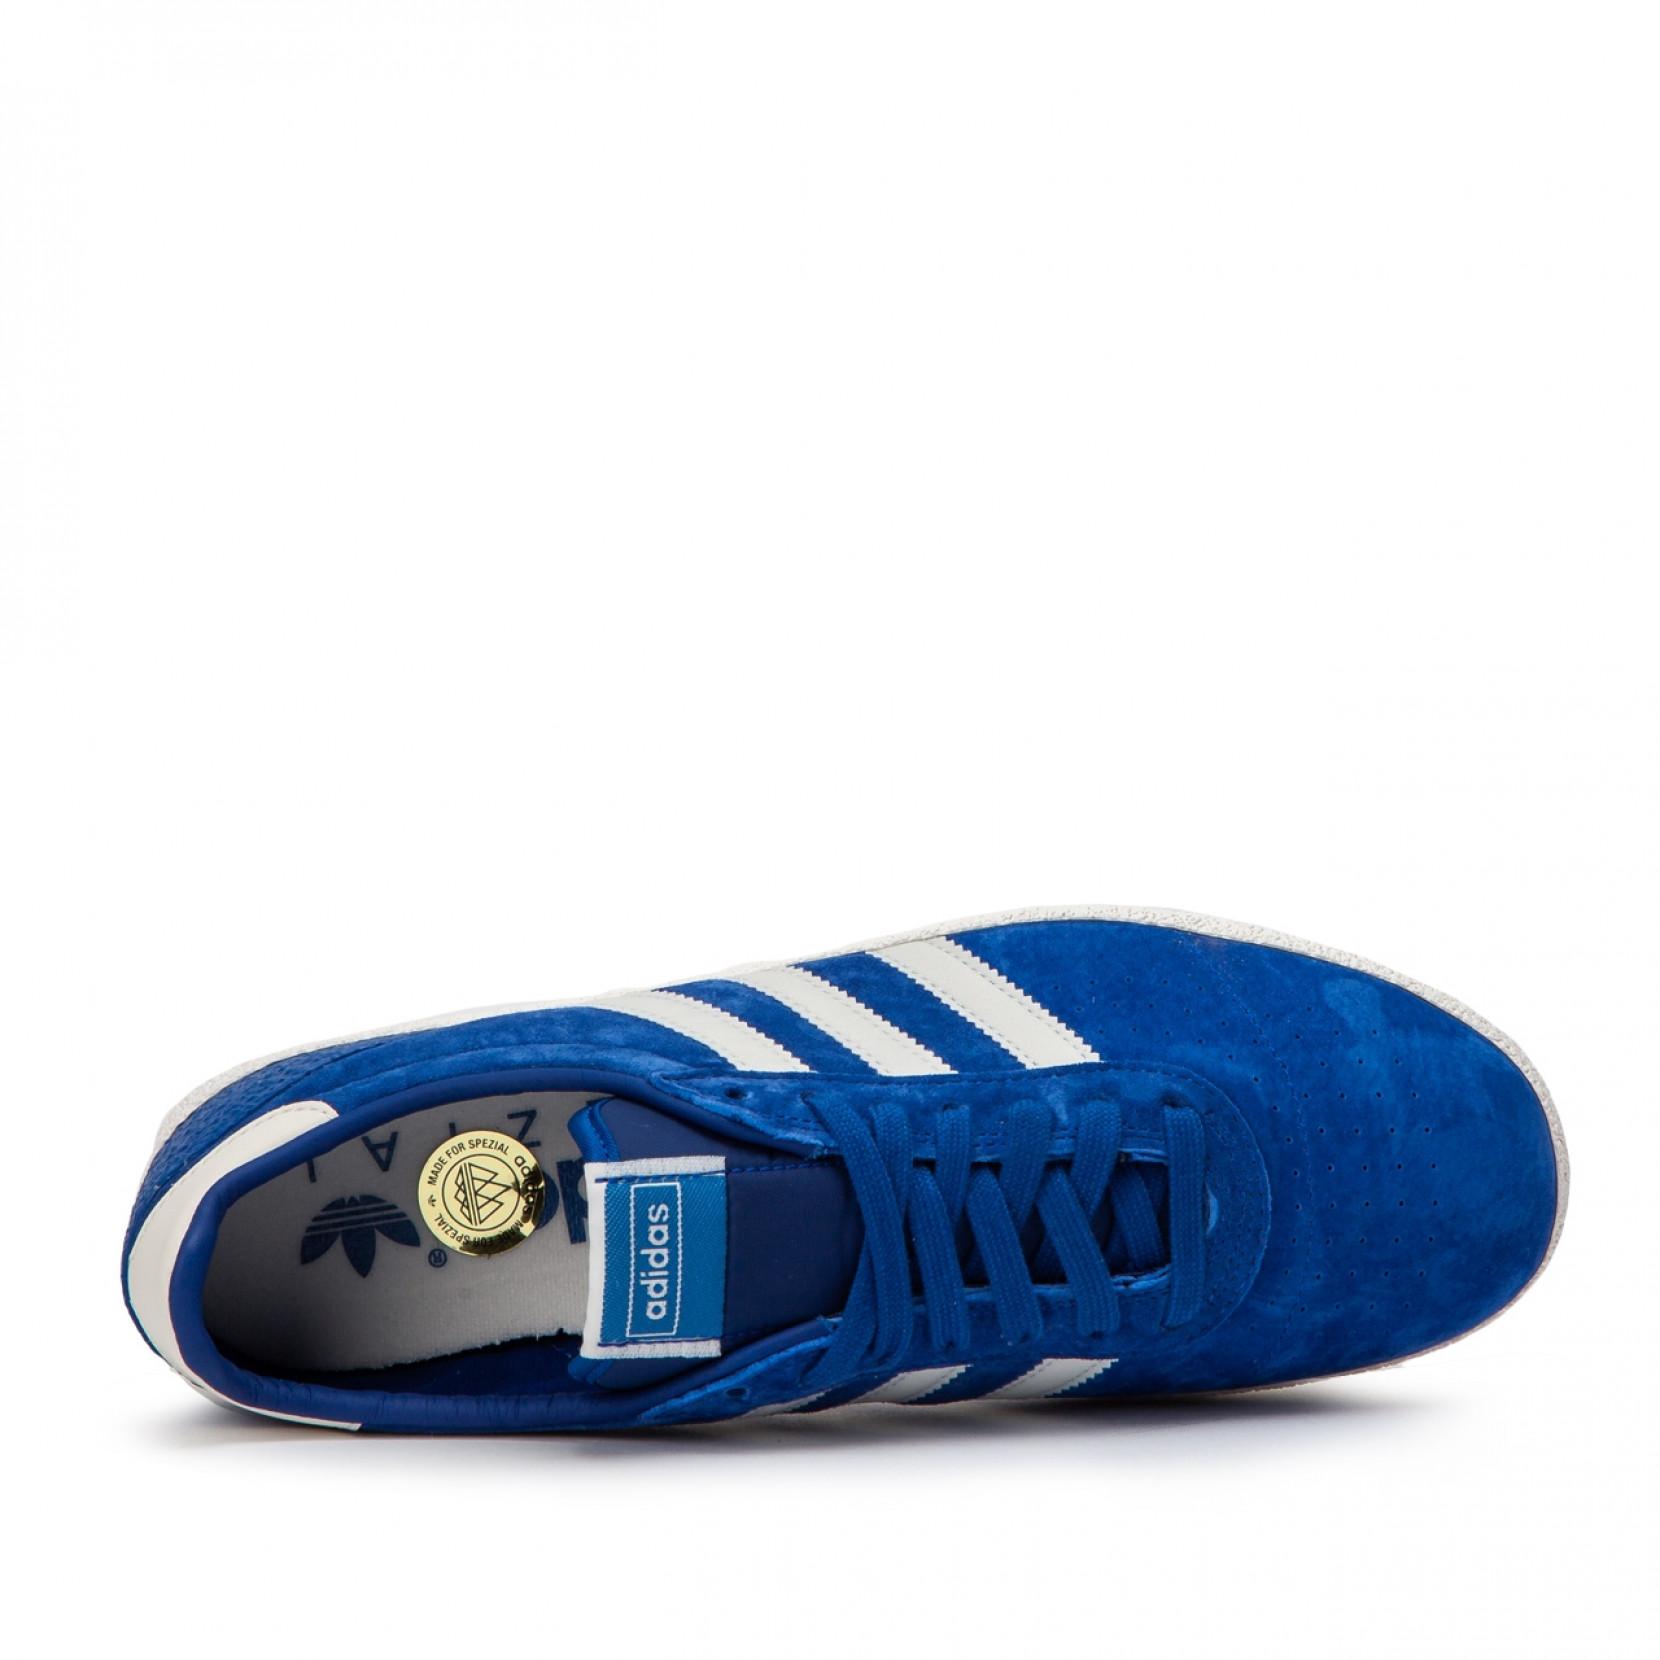 adidas Collegiate Royal And Off White Suede Munchen Super Spezial Shoes in  Blue for Men - Save 40% - Lyst